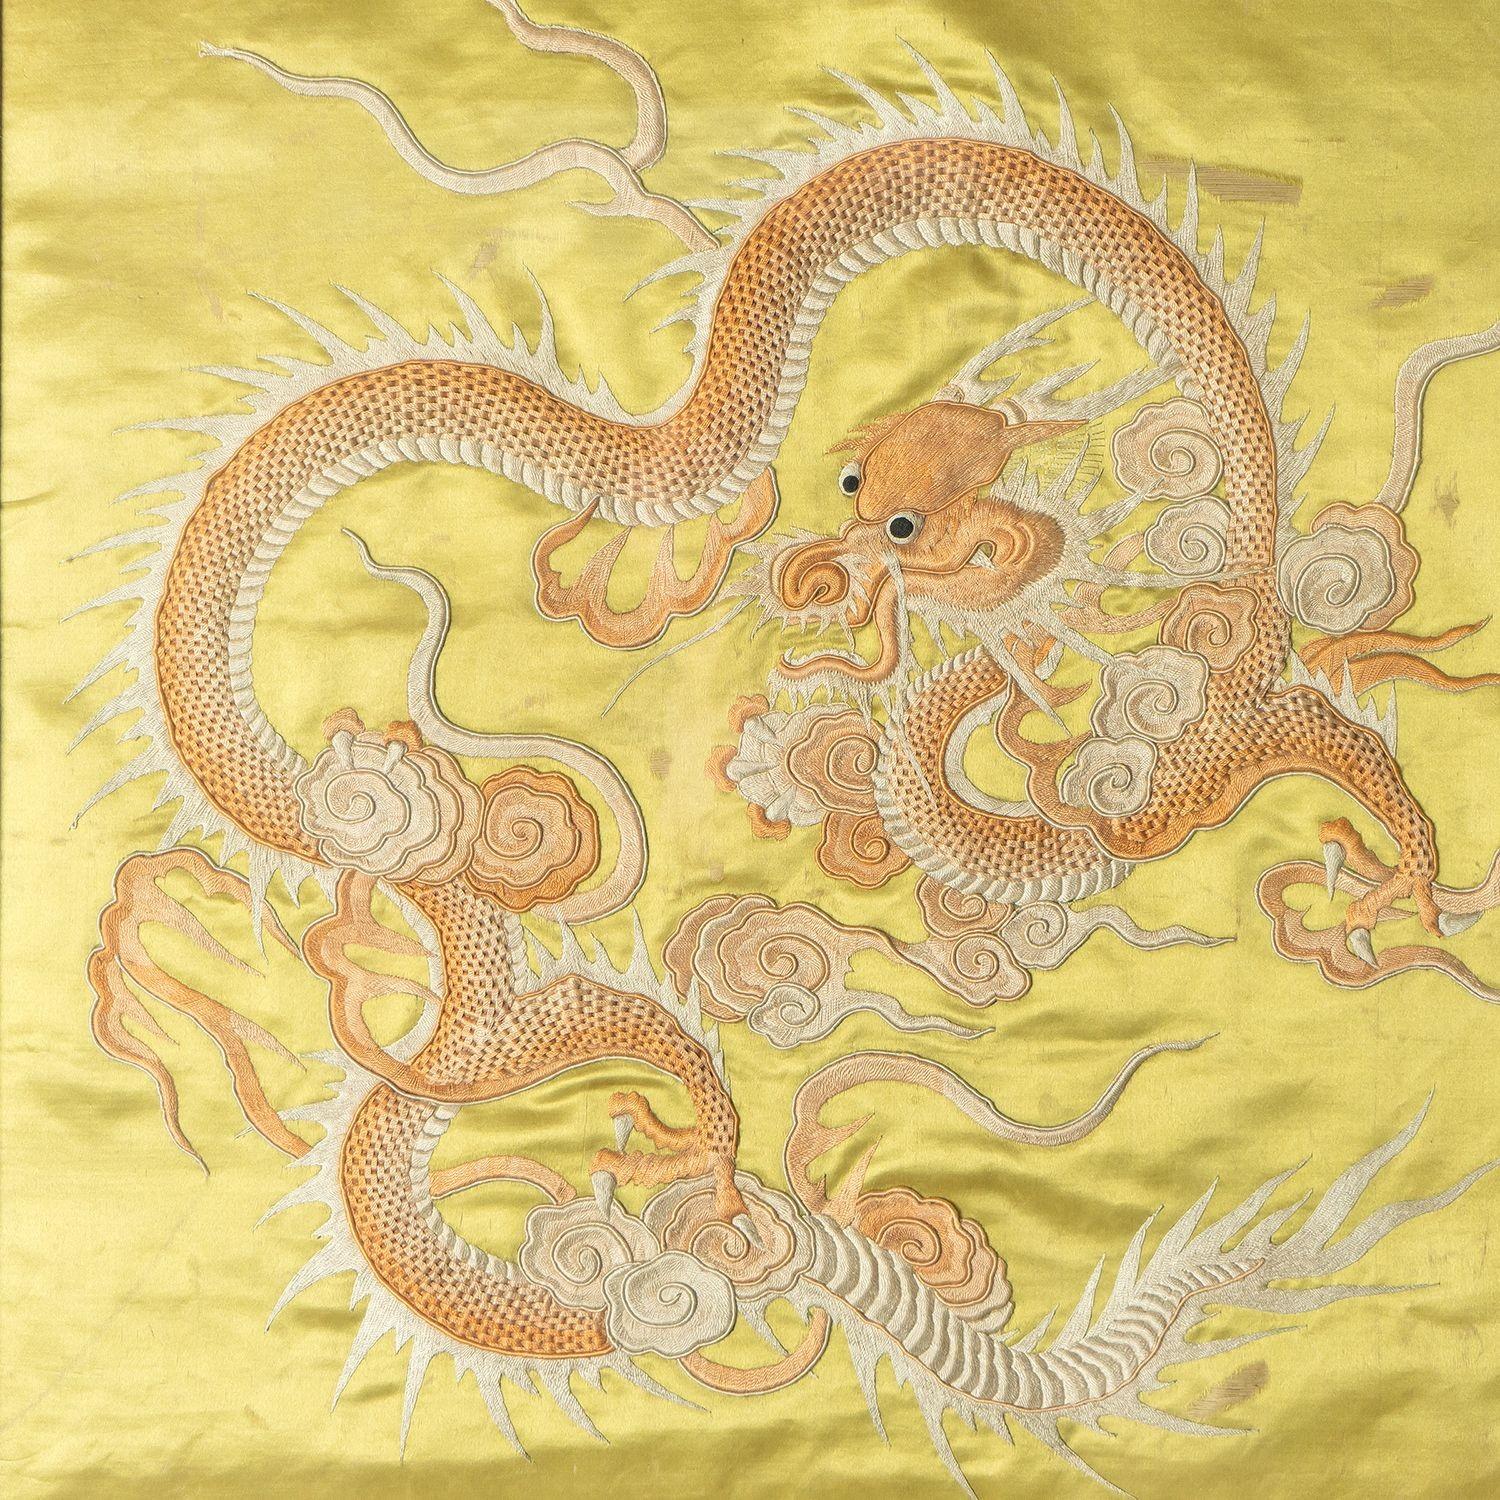 Antique Framed Eastern Textile Panel

A good quality depiction of a dragon using raised stumpwork and different stitches of silk thread on a gold silk satin background.

Does have some age to it, I would say it is at least 19th Century but could